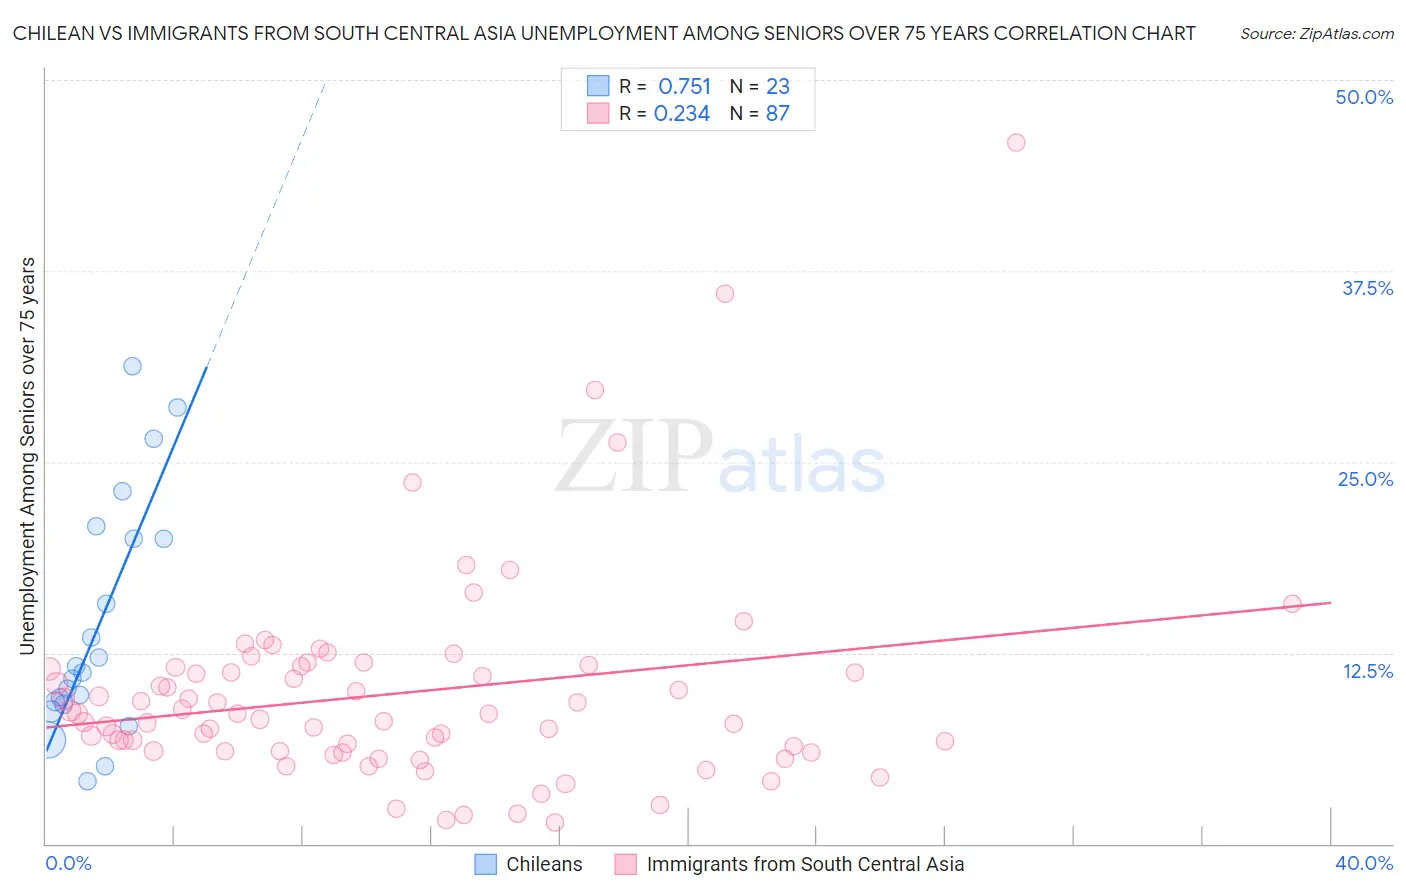 Chilean vs Immigrants from South Central Asia Unemployment Among Seniors over 75 years